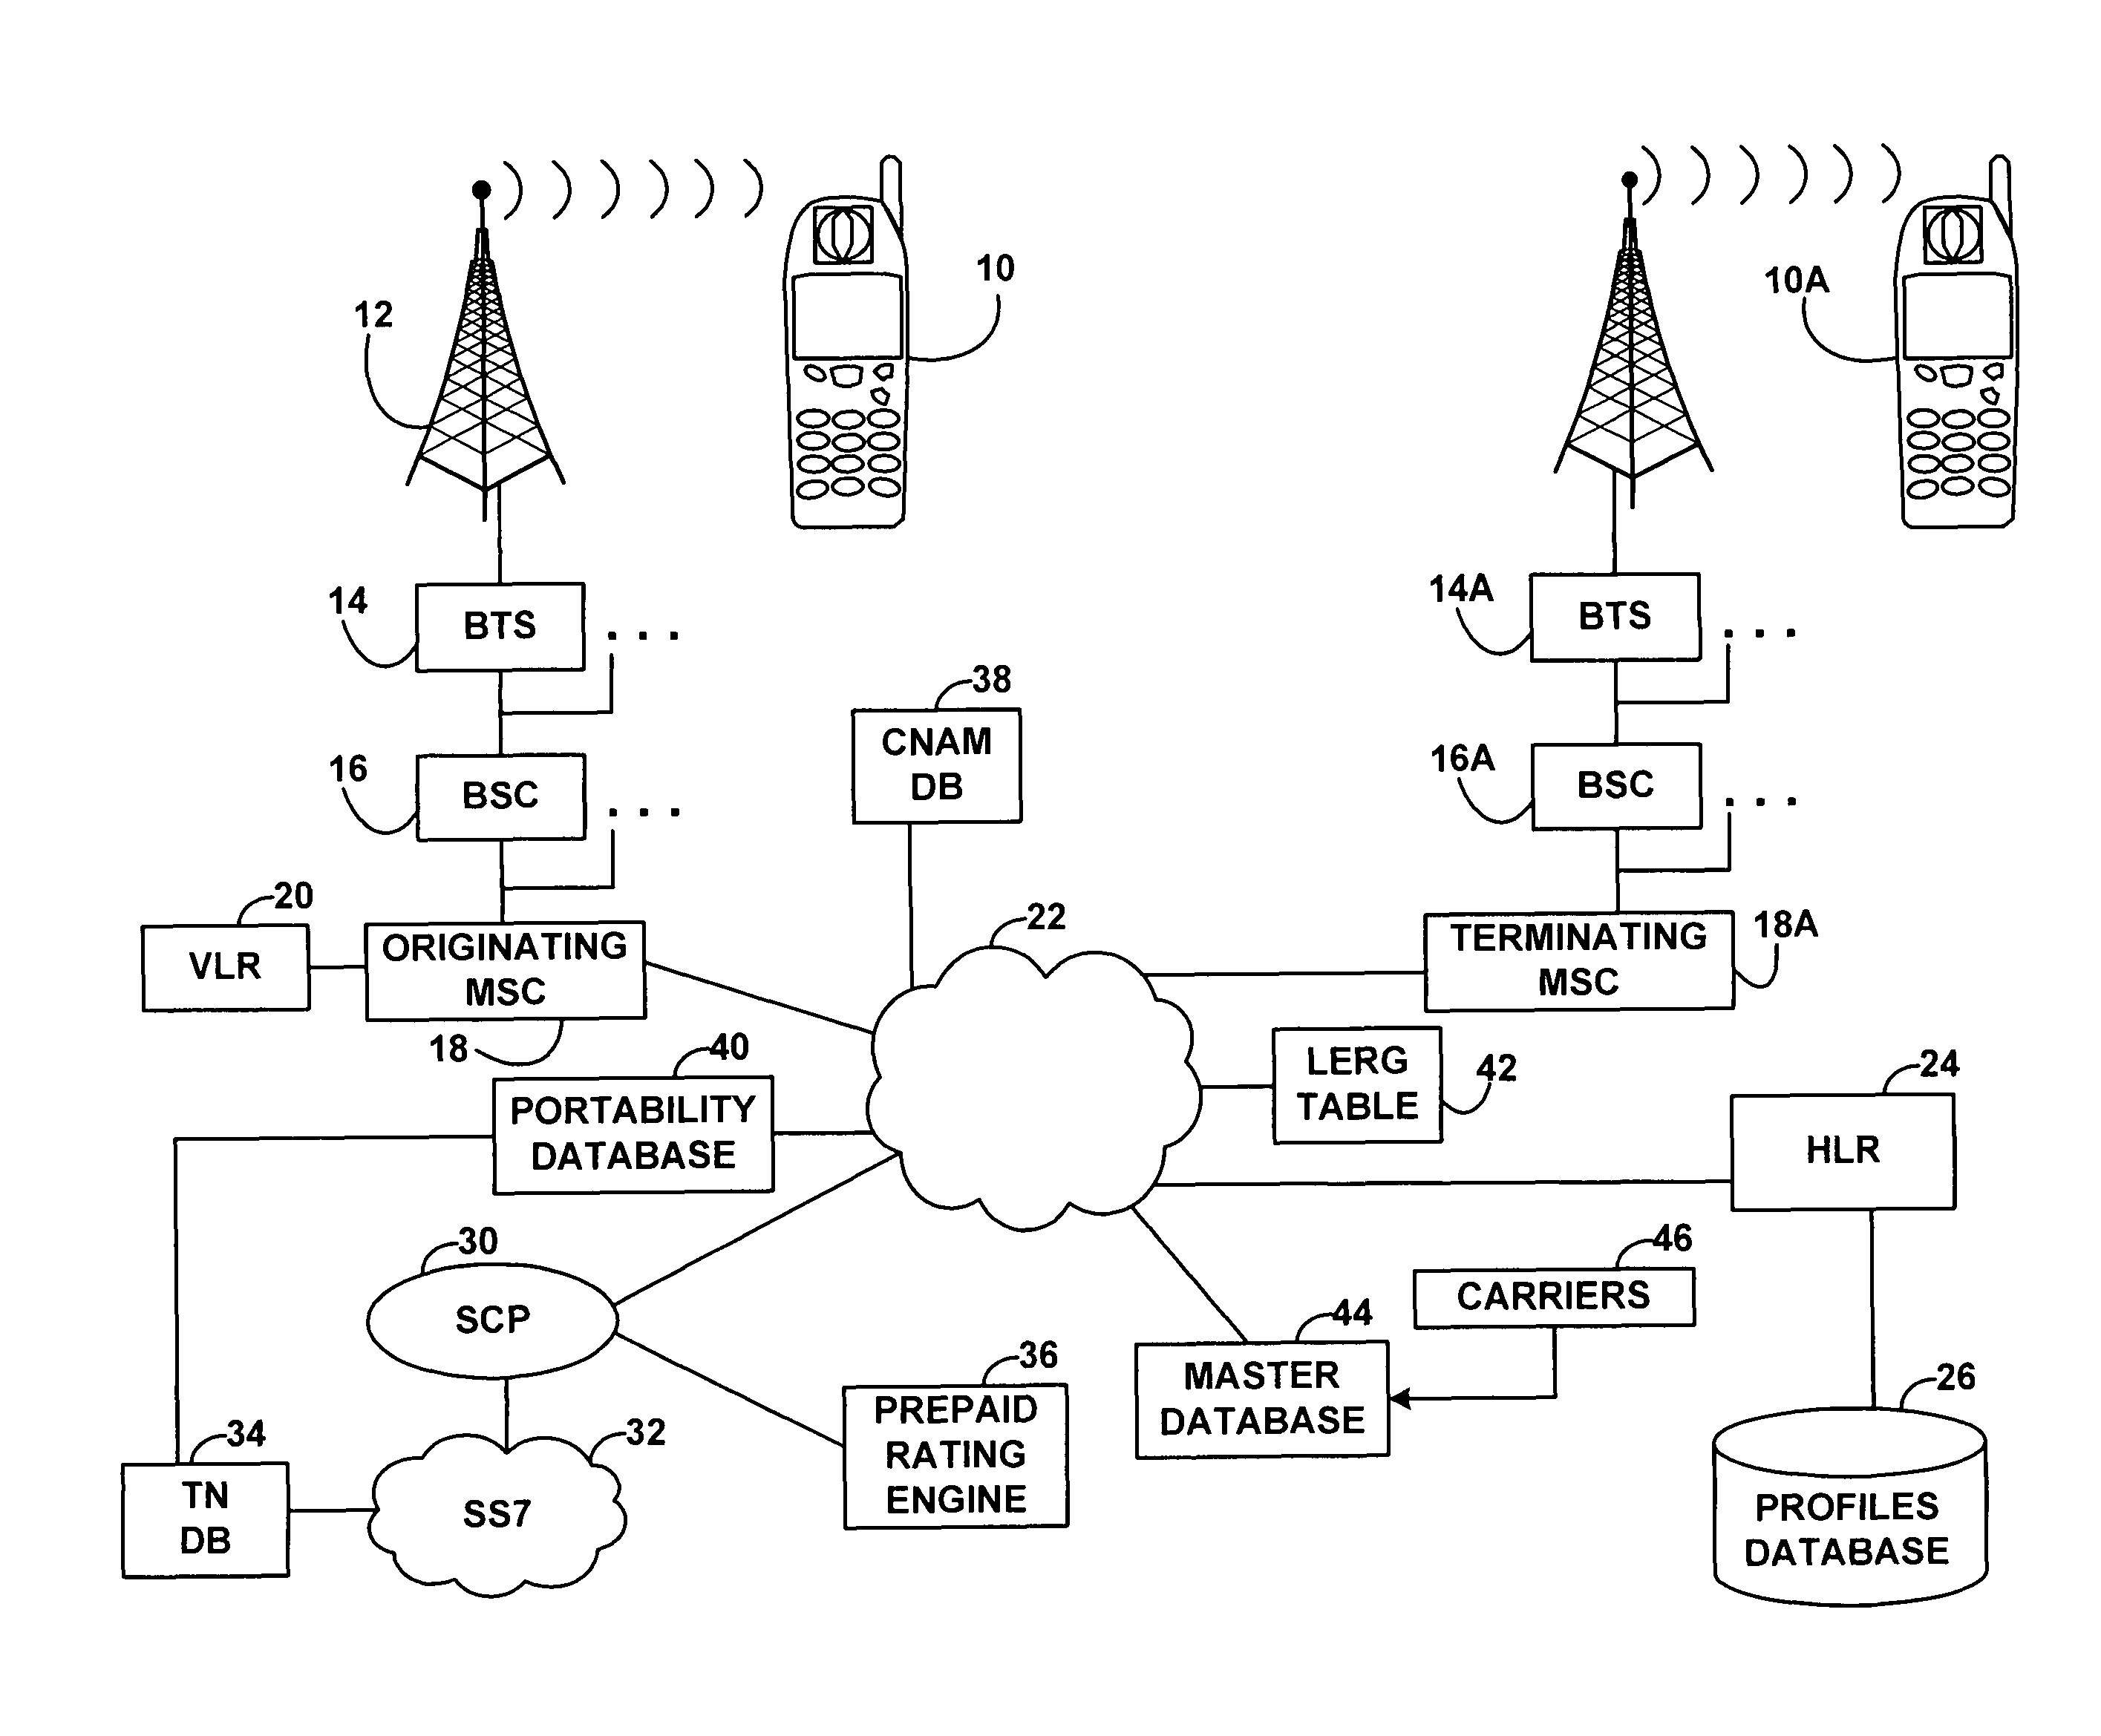 Real time network determination of intra-carrier mobile to mobile calls